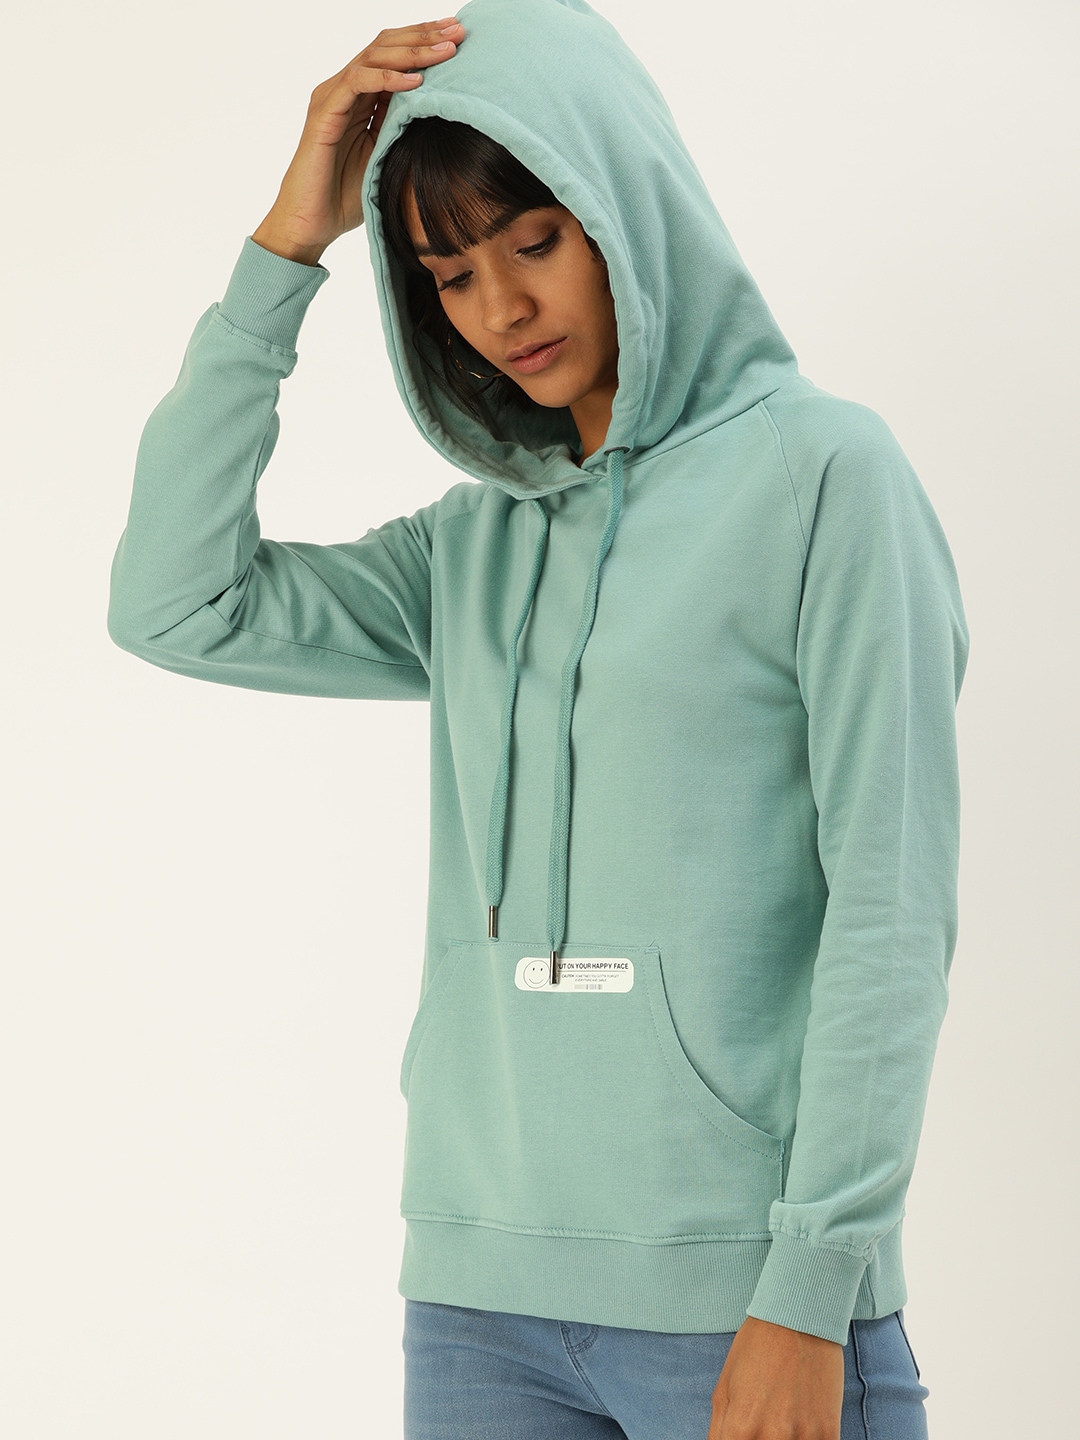 Flying Machine Women Blue Solid Hooded Sweatshirt with Print Detail Price in India